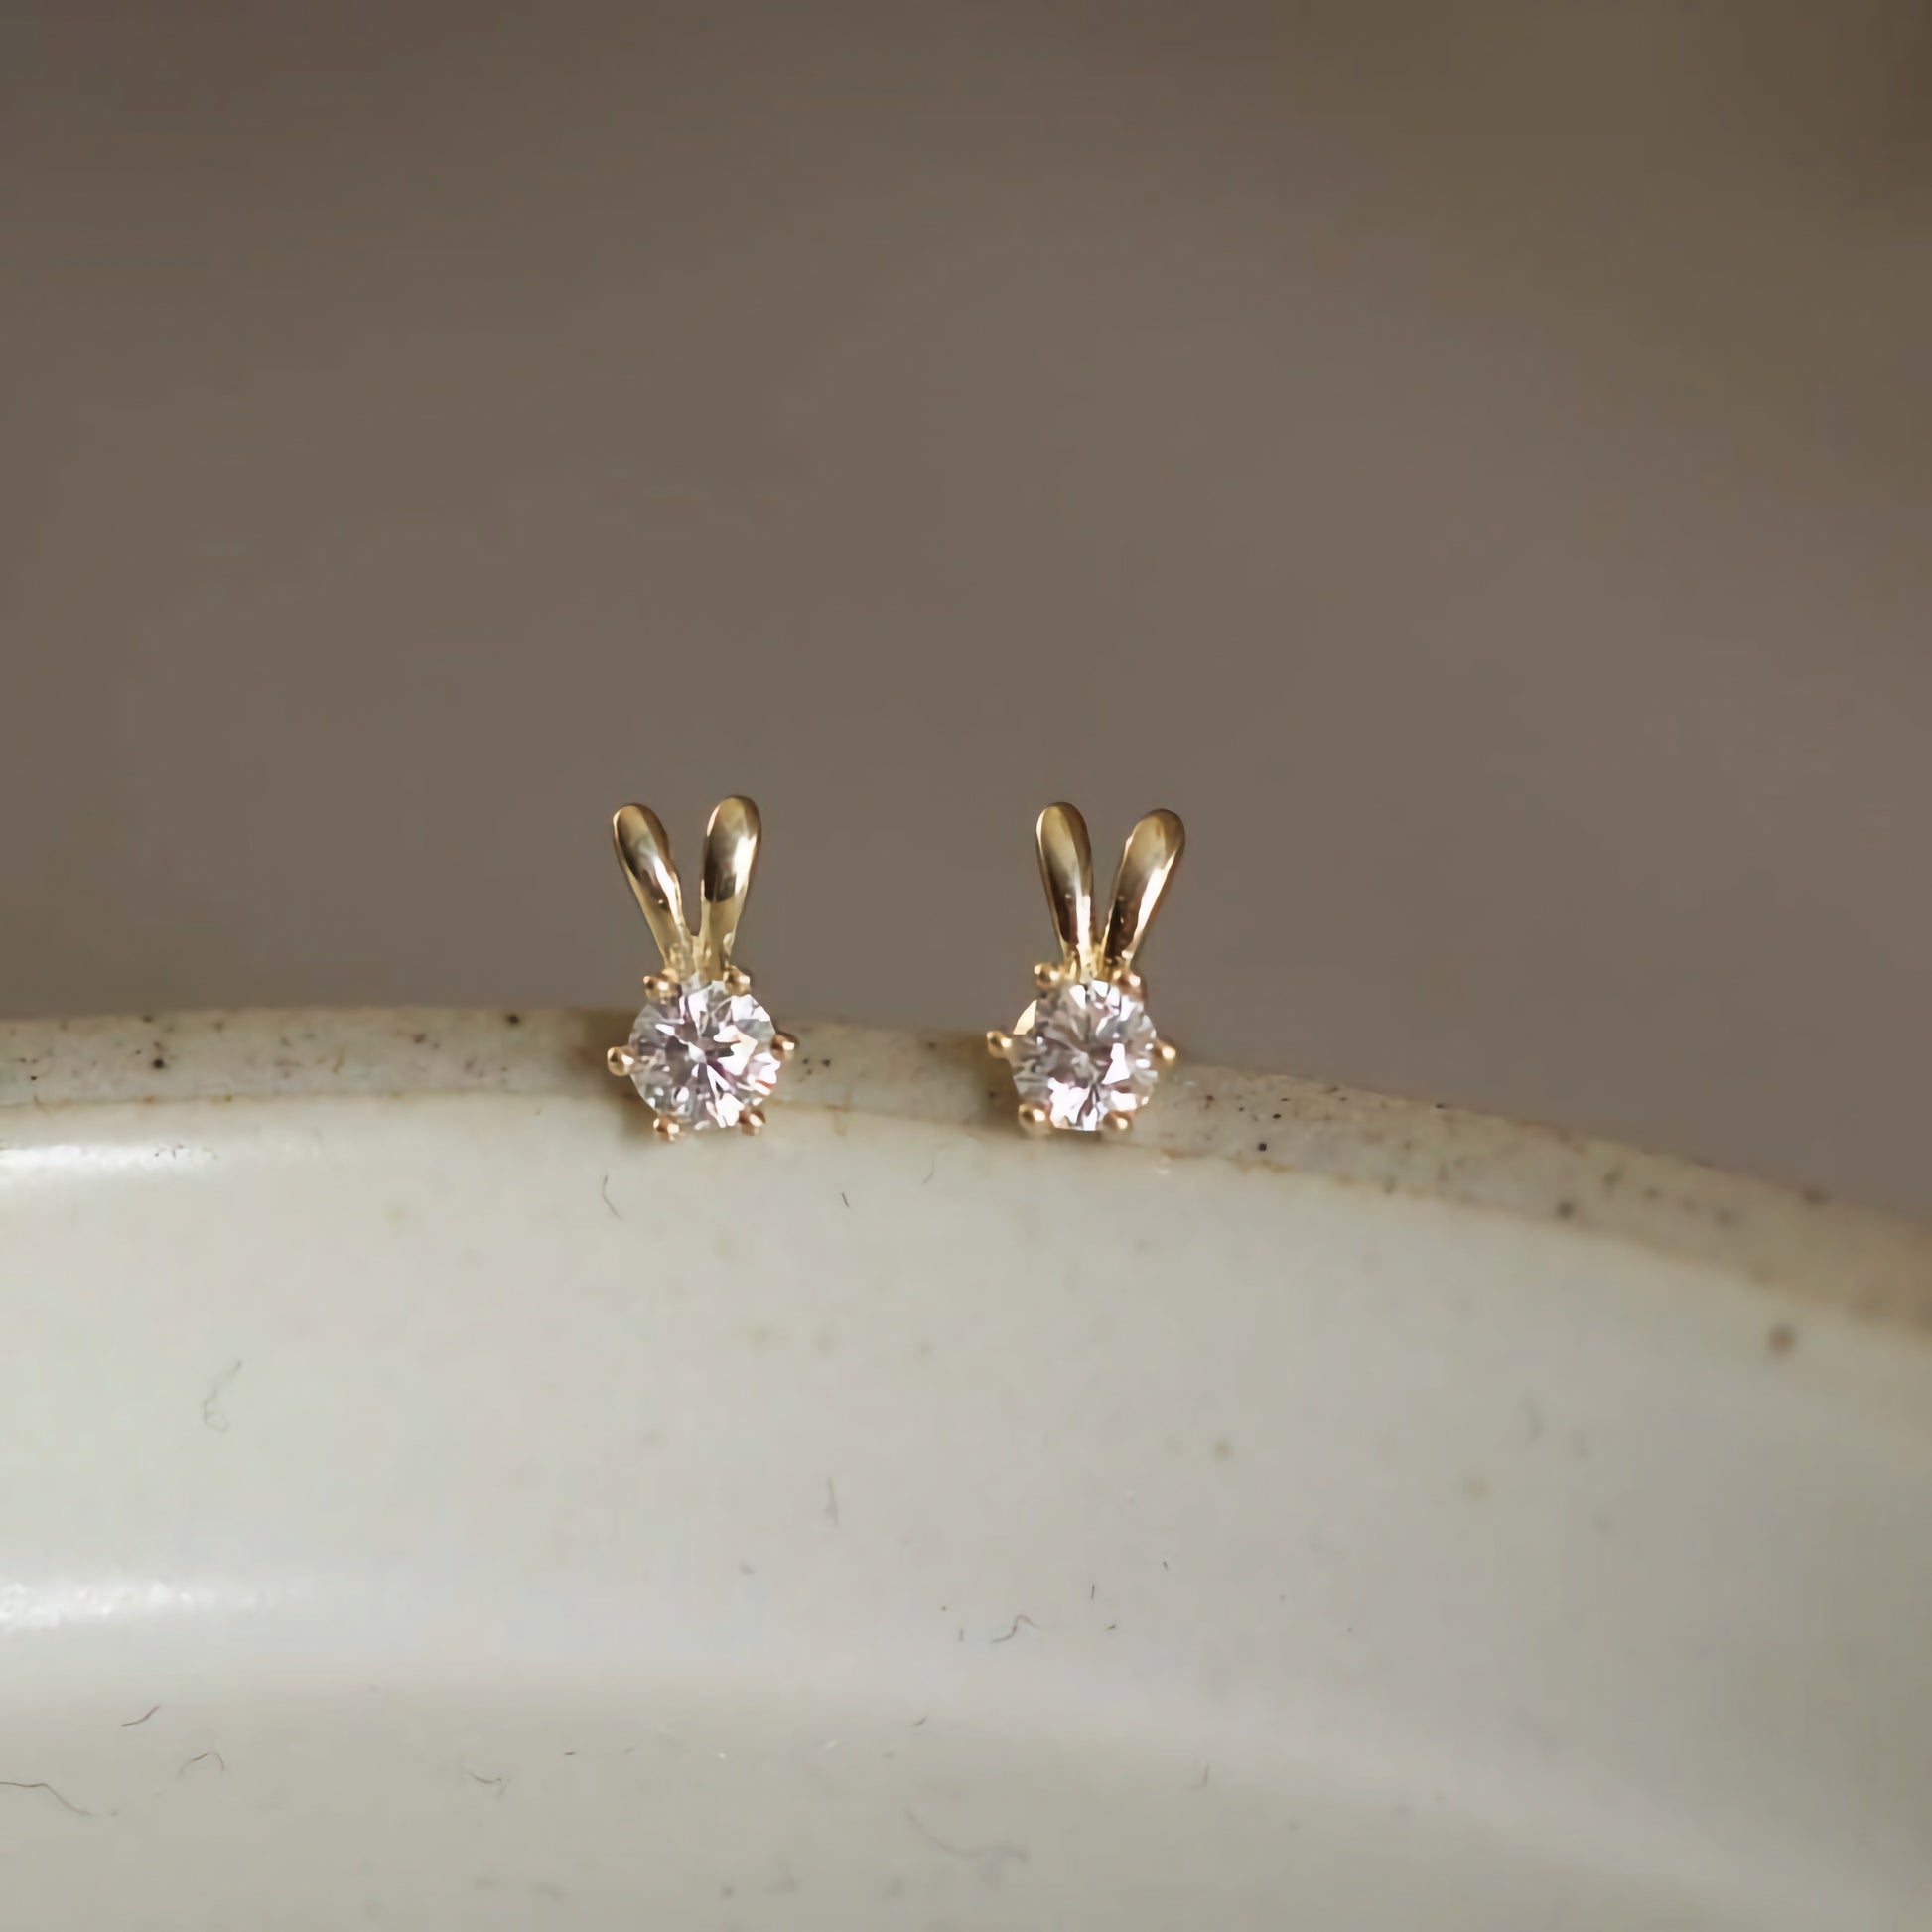 Two adorable 9ct solid gold bunny ears studs, uniquely handcrafted to bring joy and fun to your style.